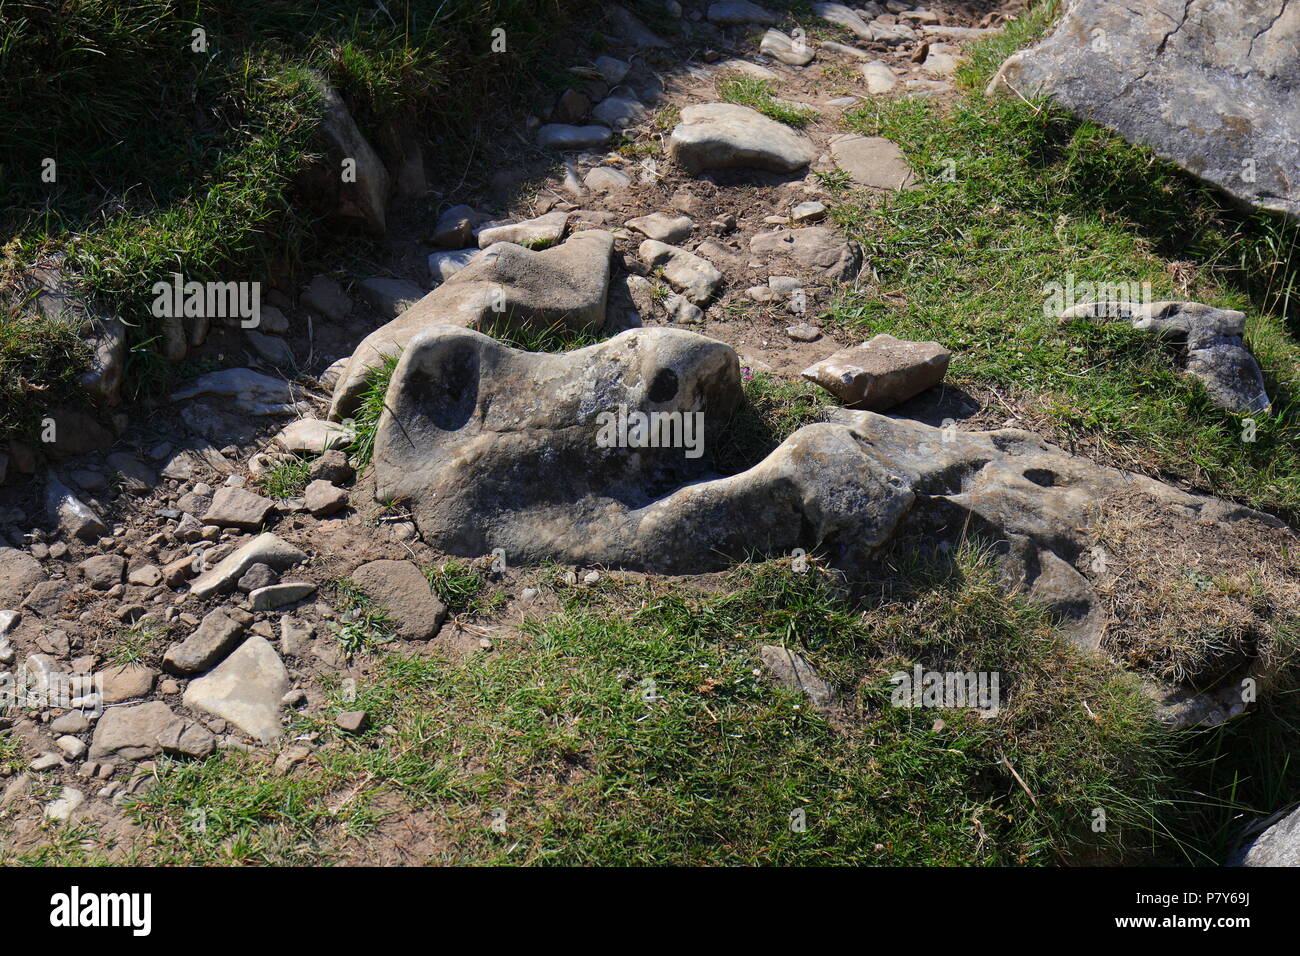 A rock that appears to have similarities to a face. Stock Photo